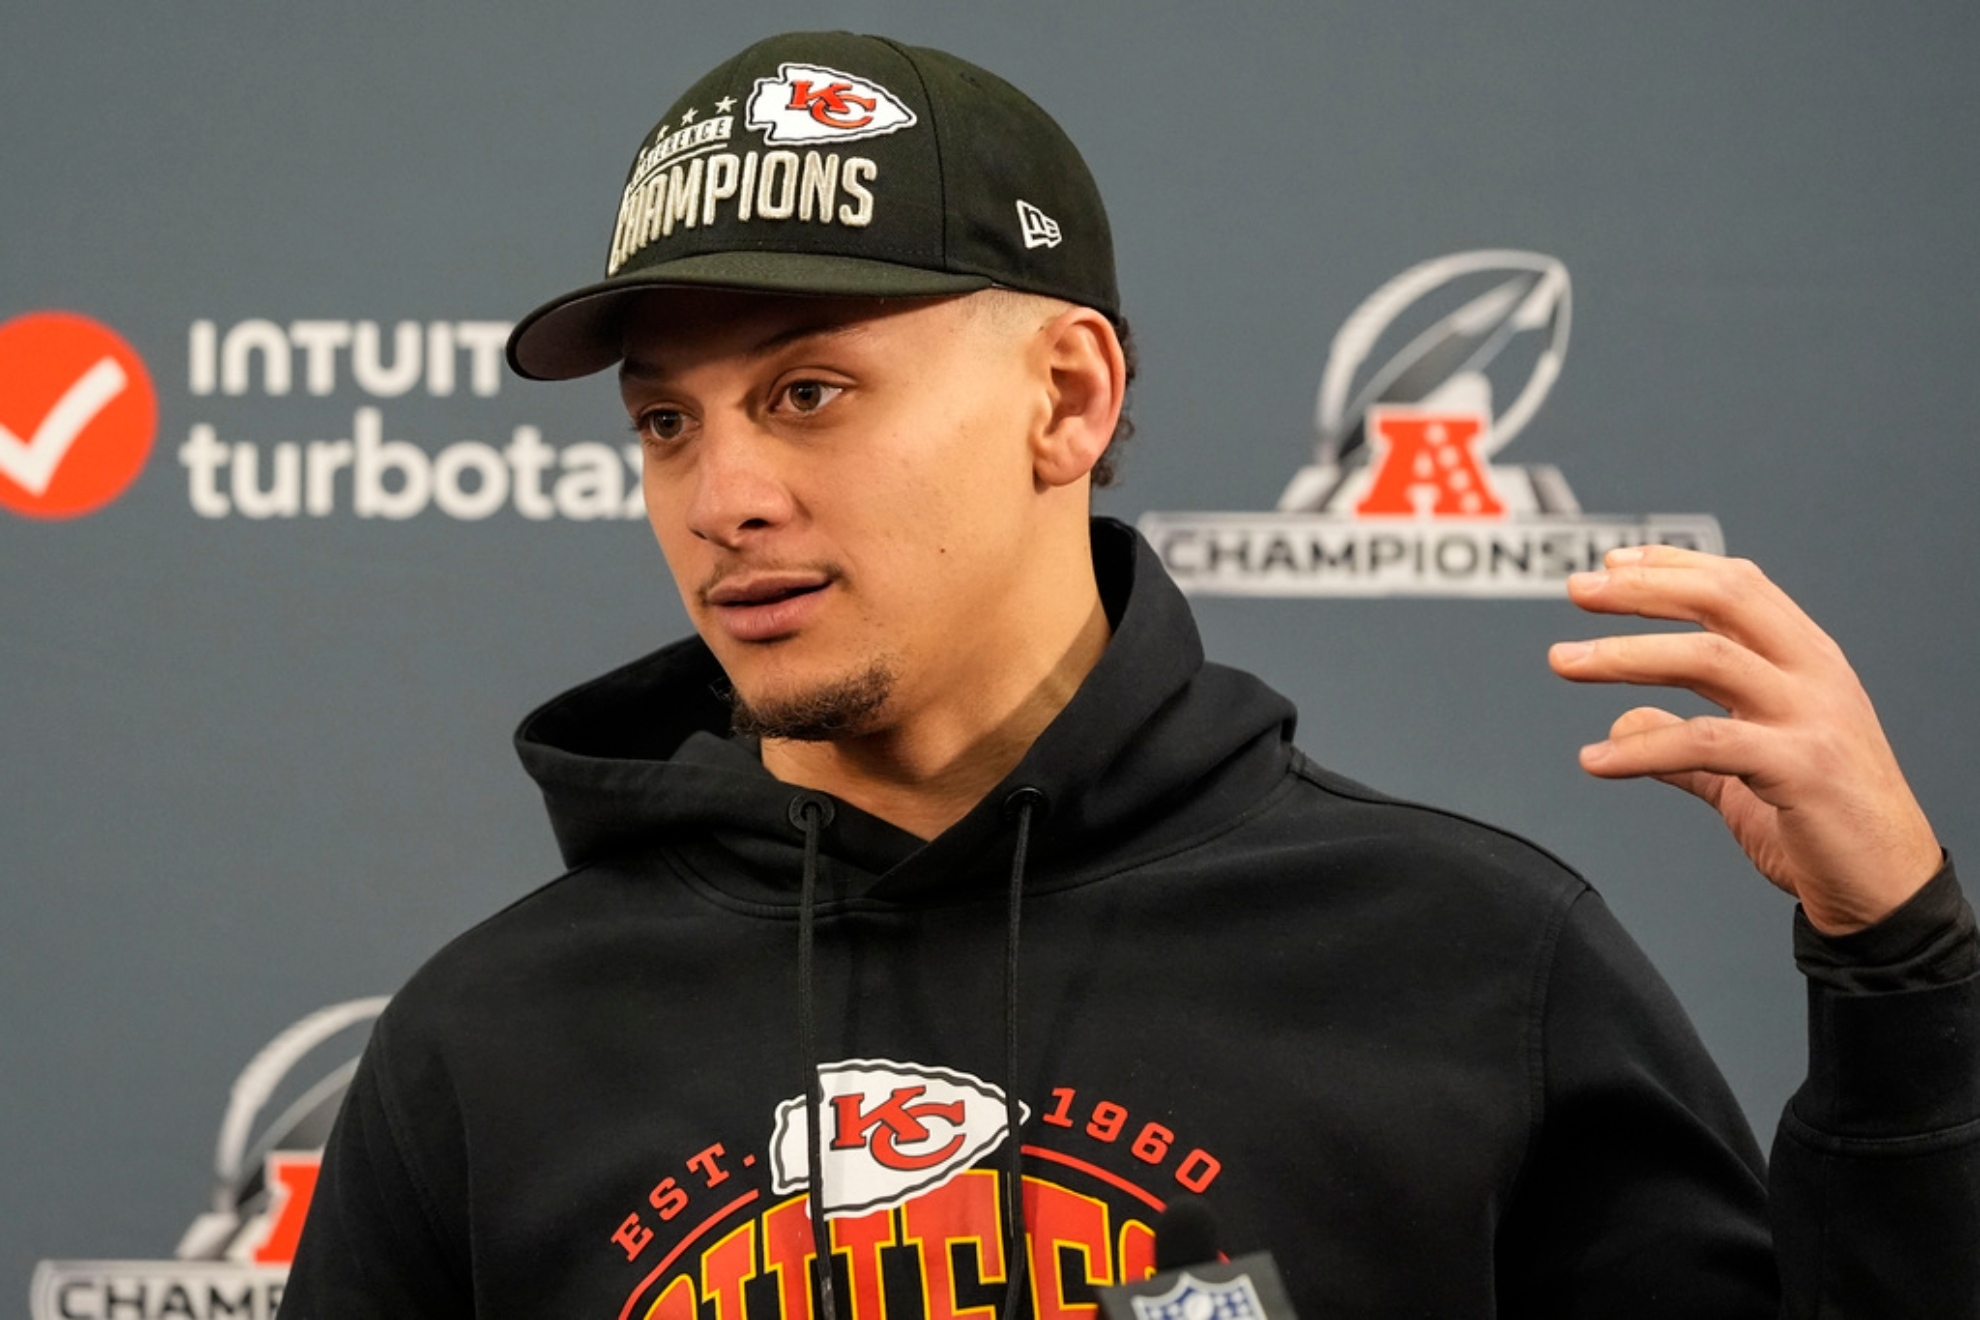 Patrick Mahomes Pro Bowl Games: How many times has the Chiefs QB been in the Pro Bowl games?